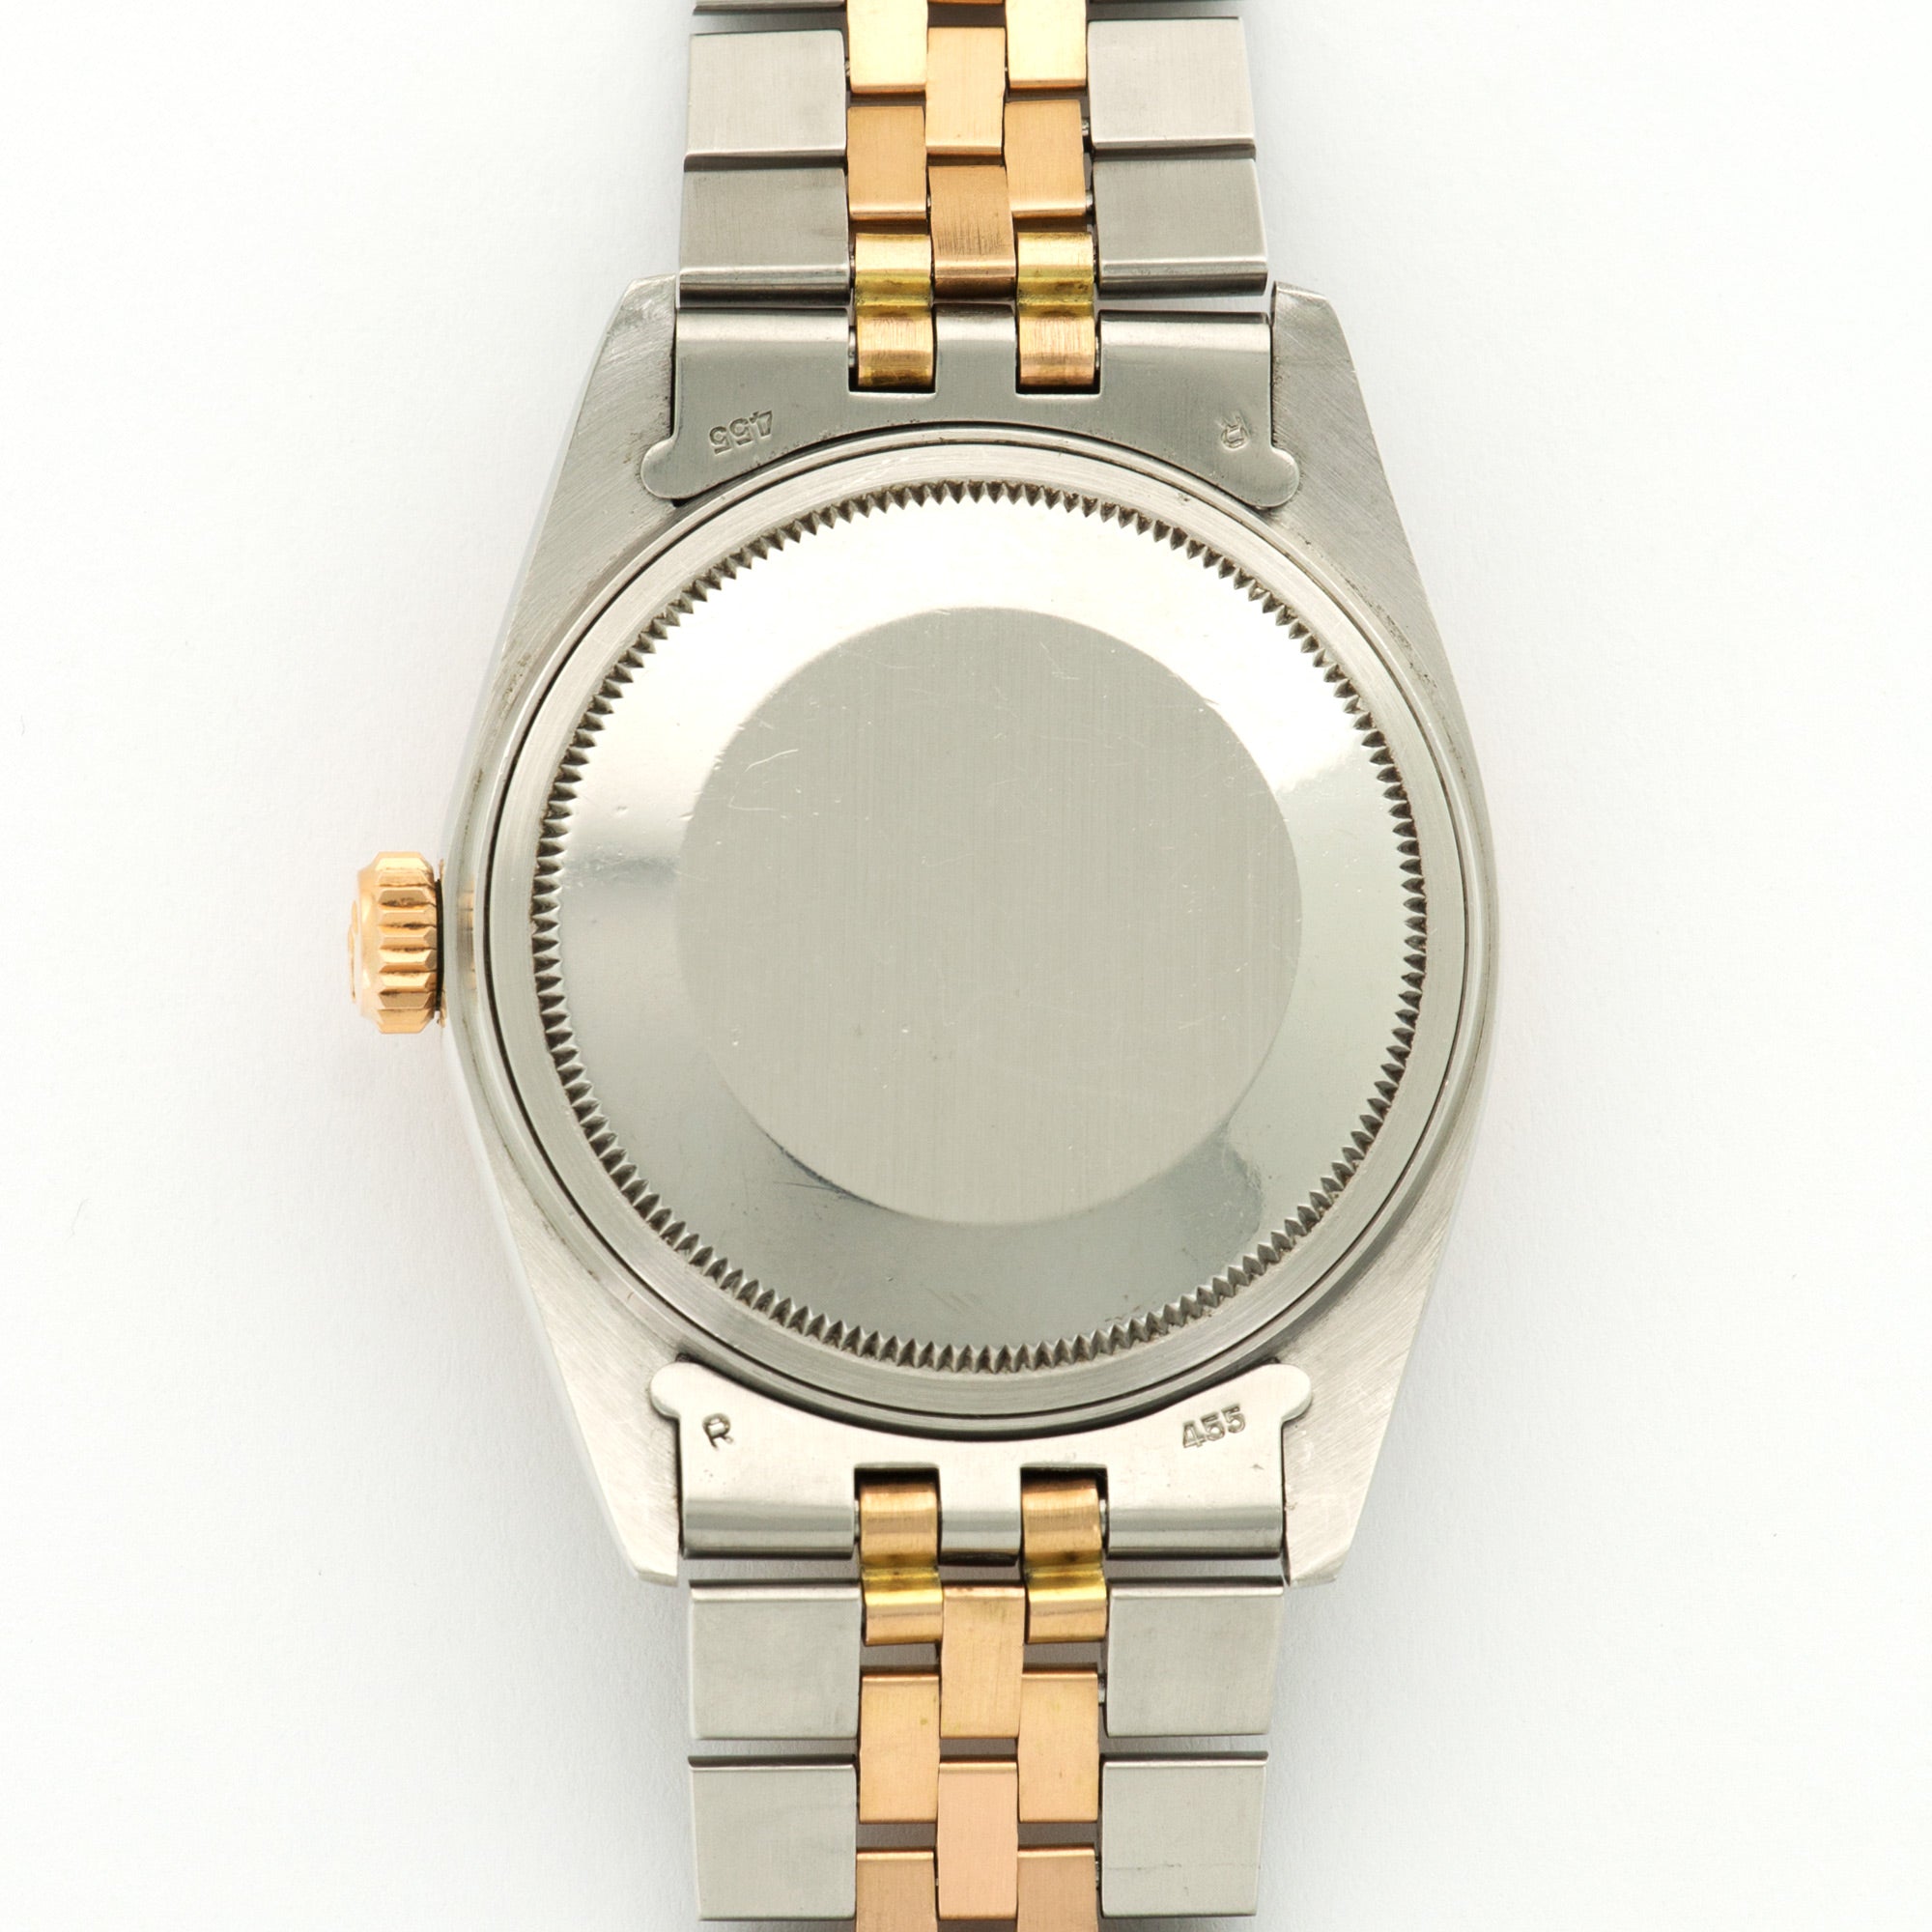 Rolex - Rolex Two-Tone Rose Gold Datejust Watch Ref. 1601 - The Keystone Watches